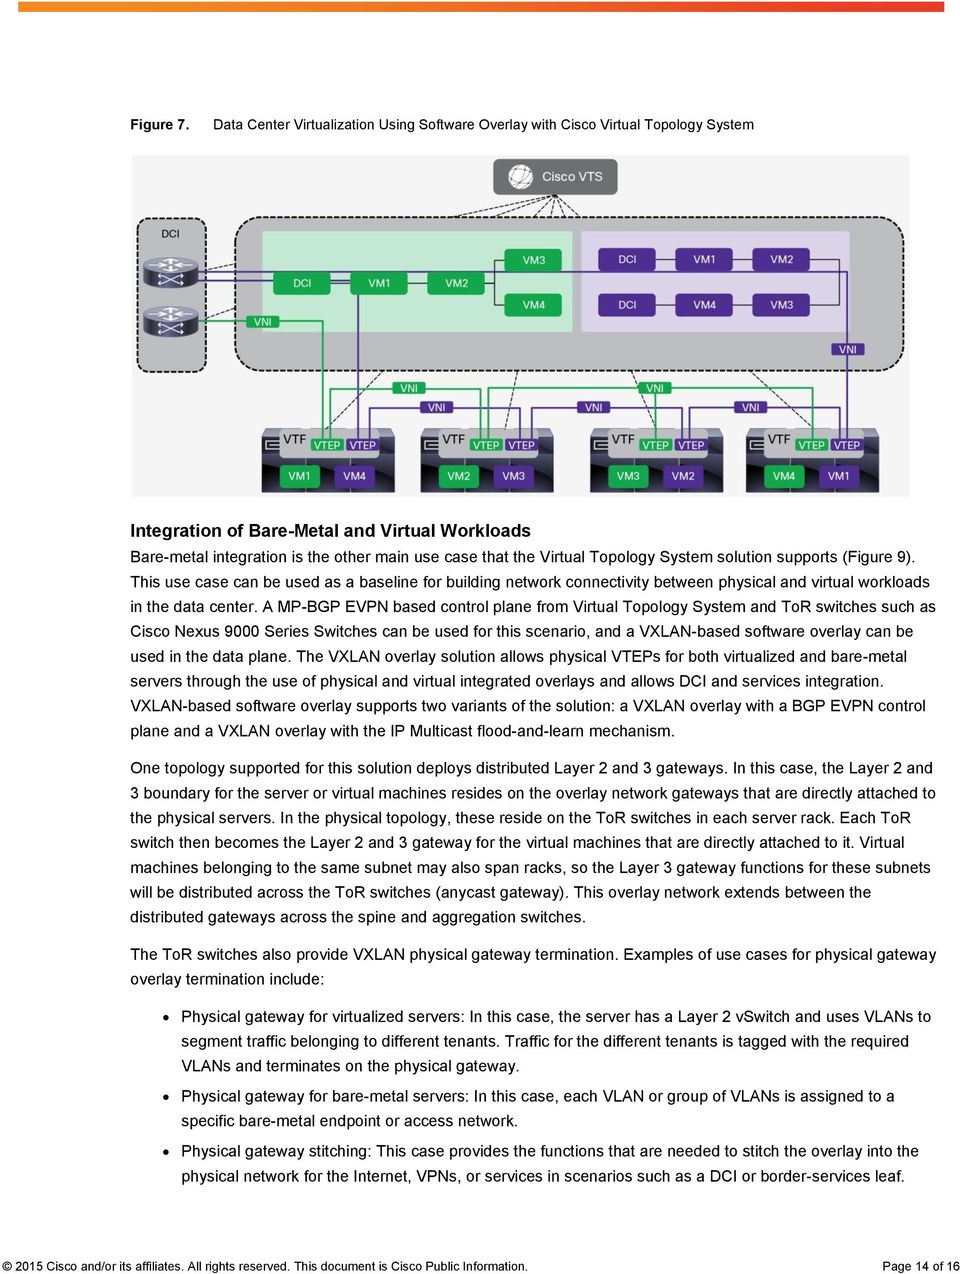 Topology System solution supports (Figure 9). This use case can be used as a baseline for building network connectivity between physical and virtual workloads in the data center.